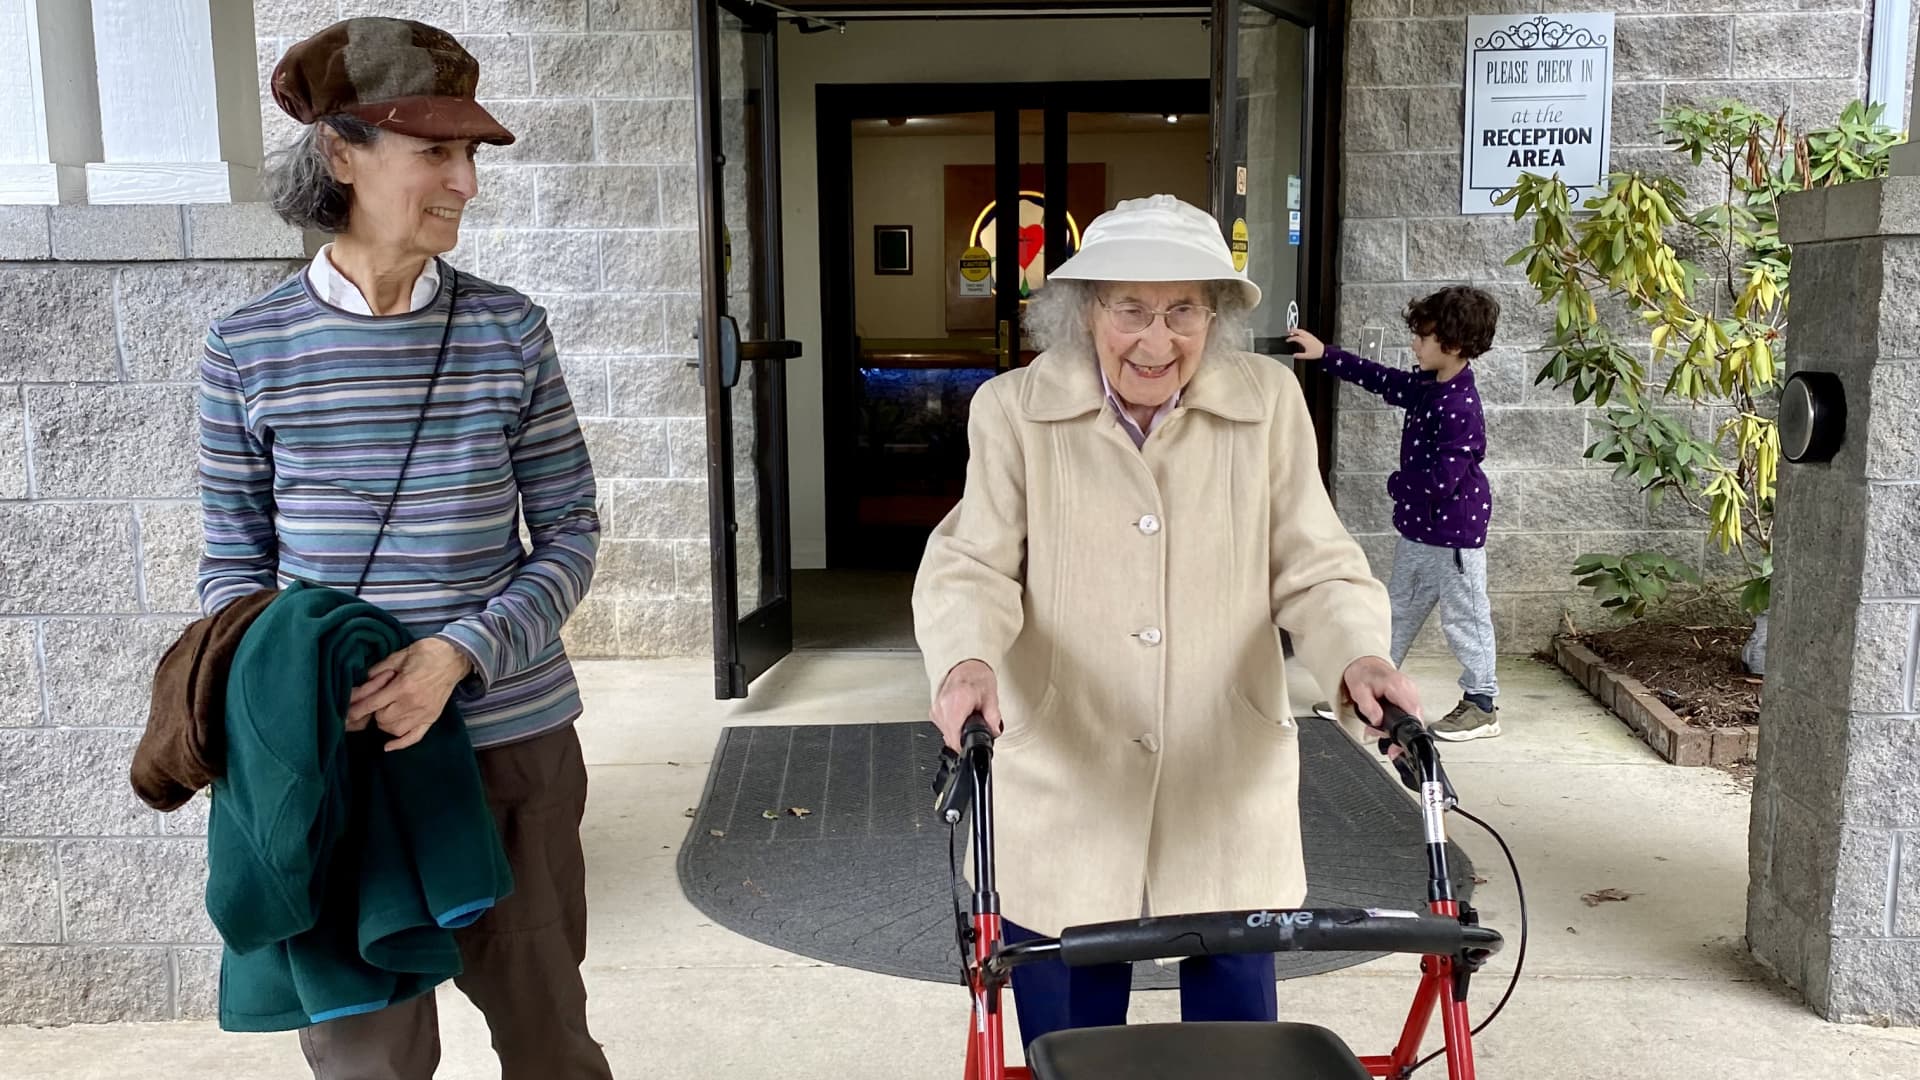 100-year-old sisters share 5 top tips for leading a long, happy life